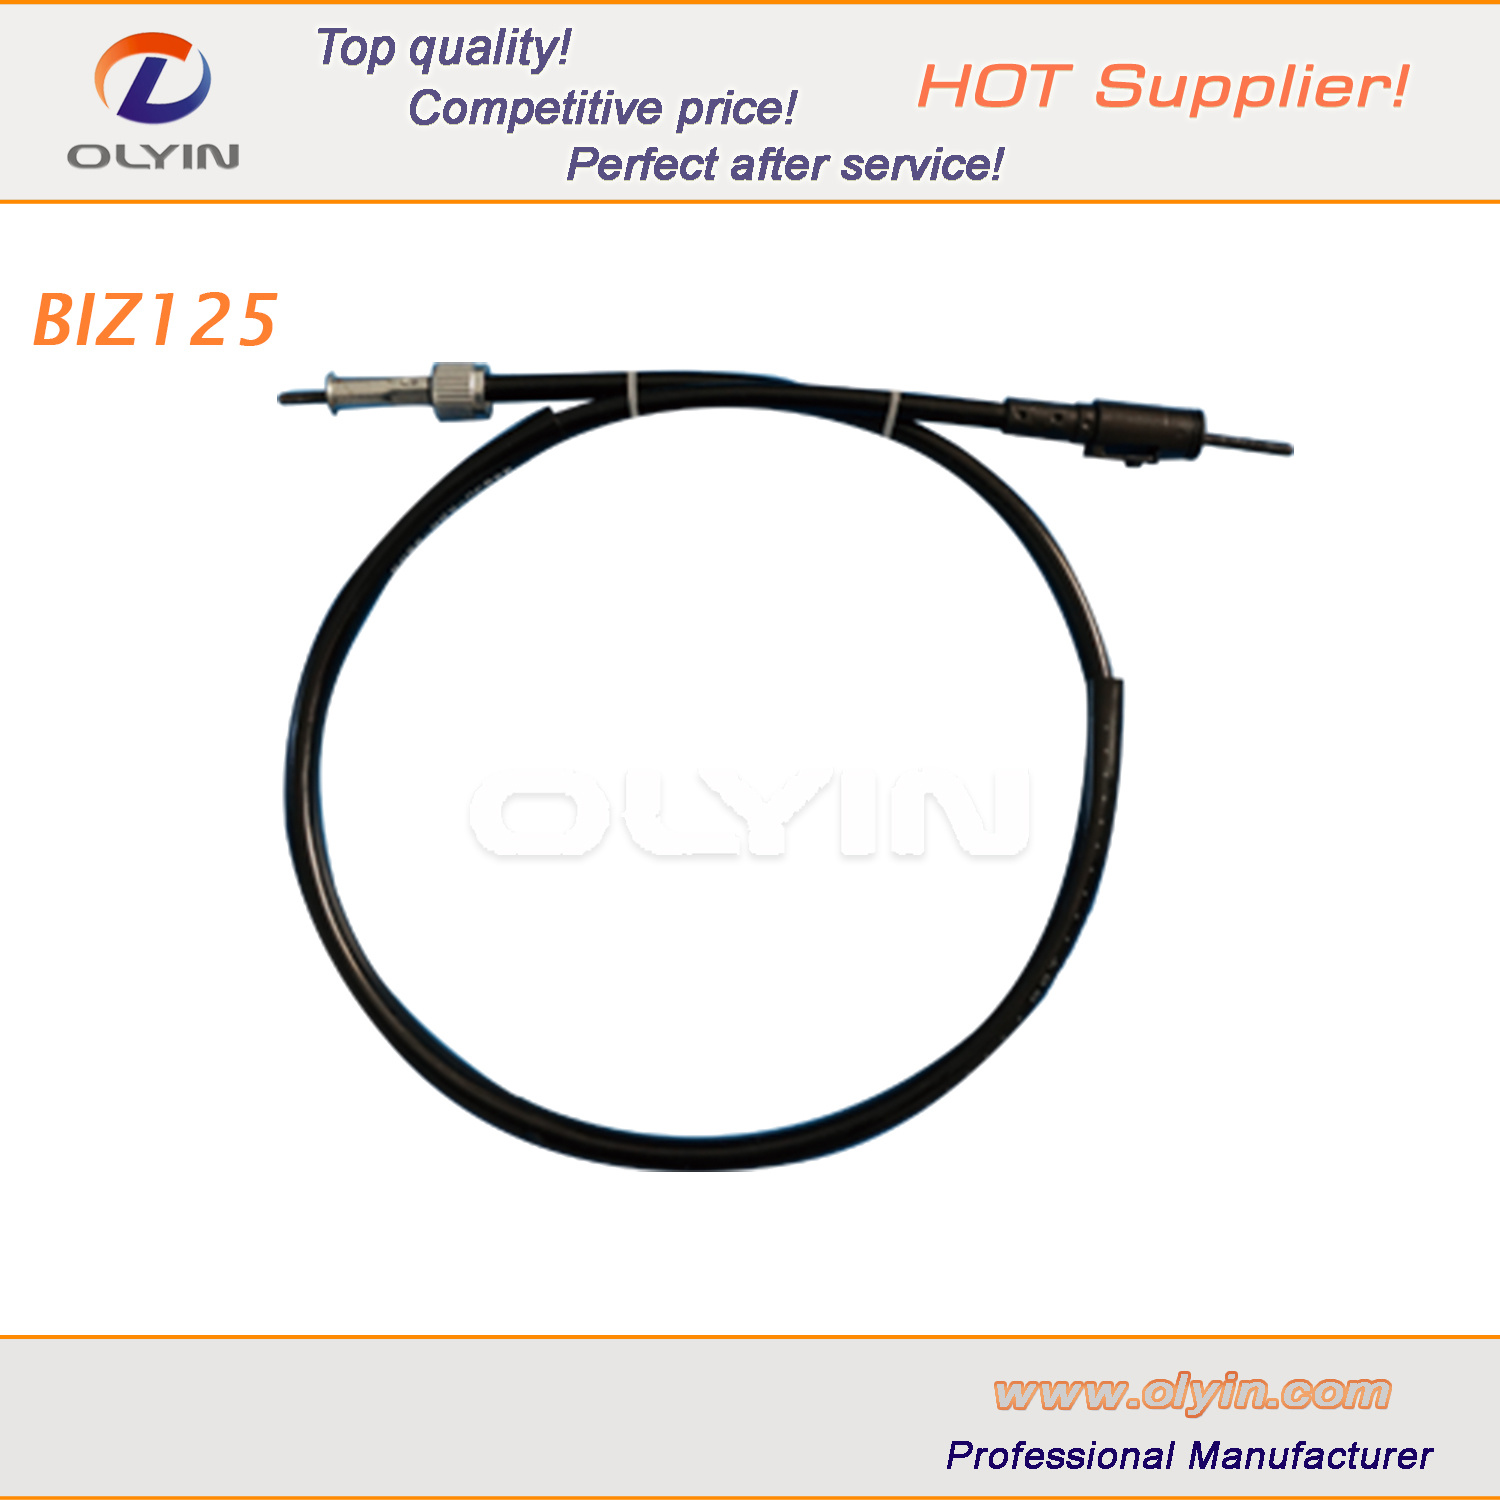 Brazil Motorcycle Cable, Honda Motorcycle Speedometer Cable for Biz125